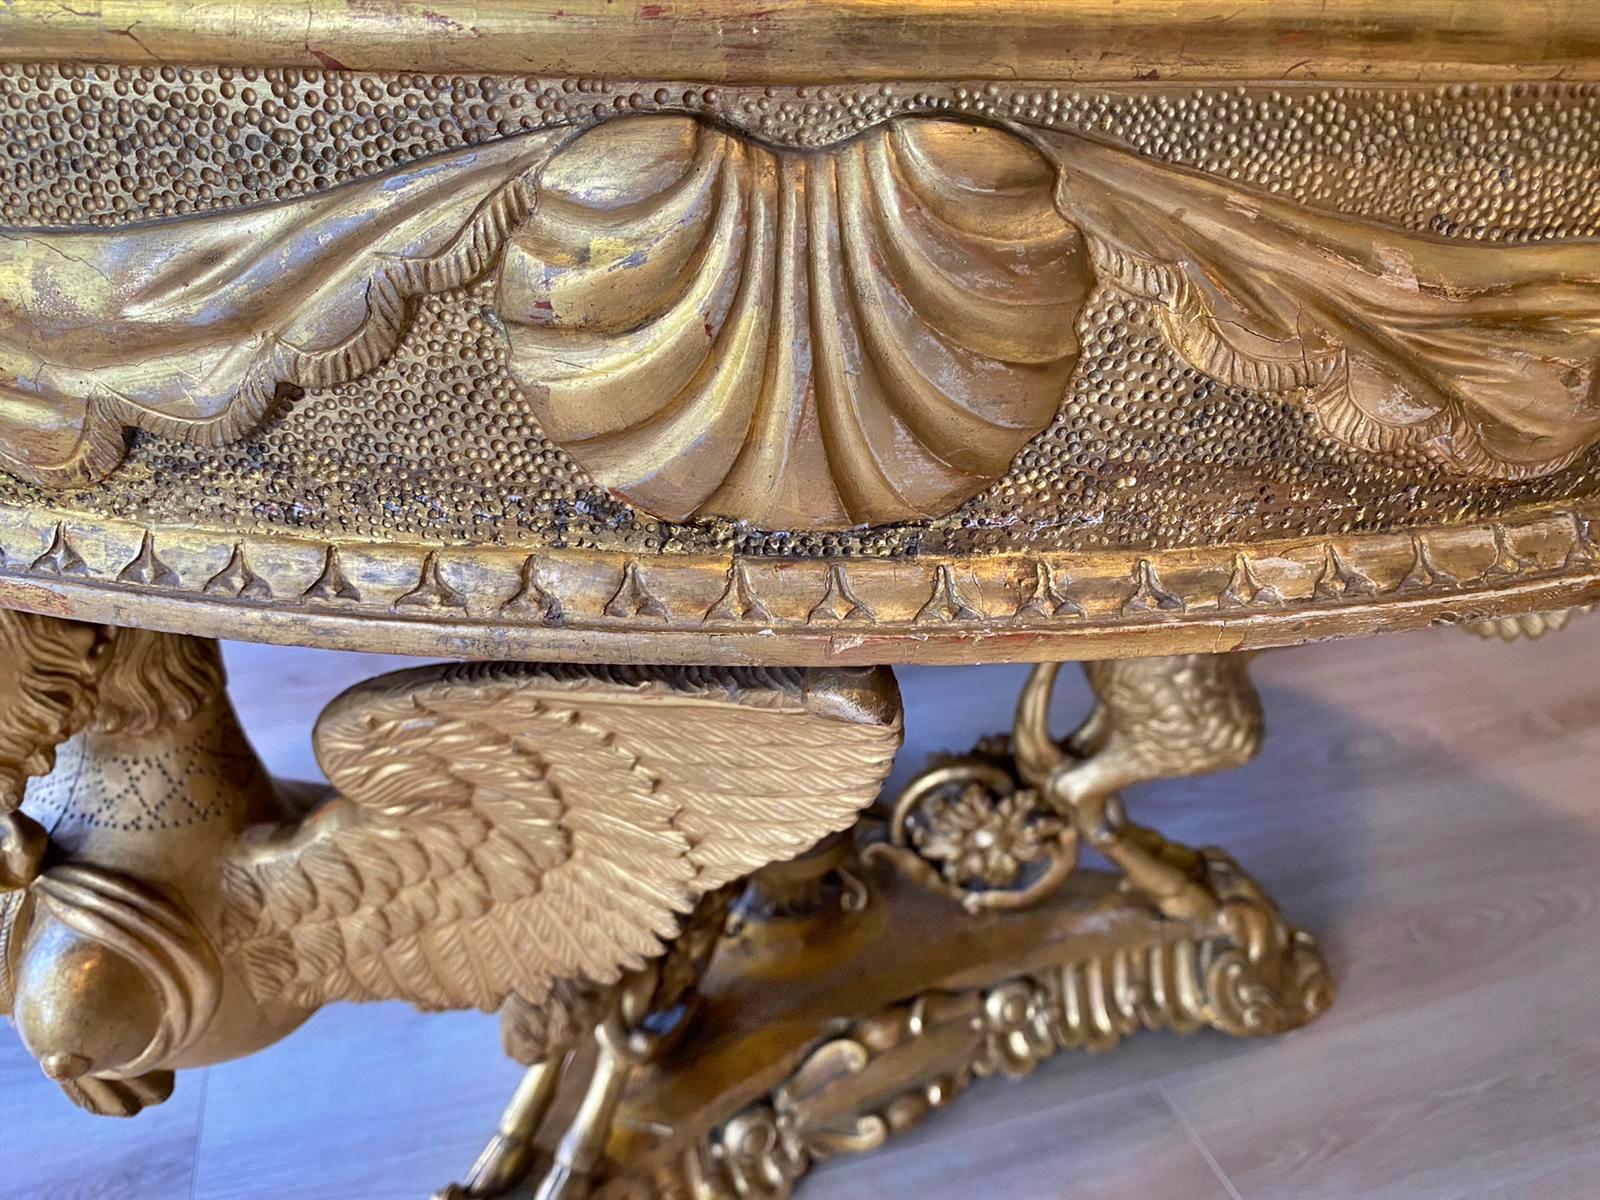 Impressive pair of tables First Empire Napoleon III
early 19th century
Diameter: 115cm
Height: 82
Italian Hight Quality Marble with amazing top with Snails and Ammonites
perfect condition.